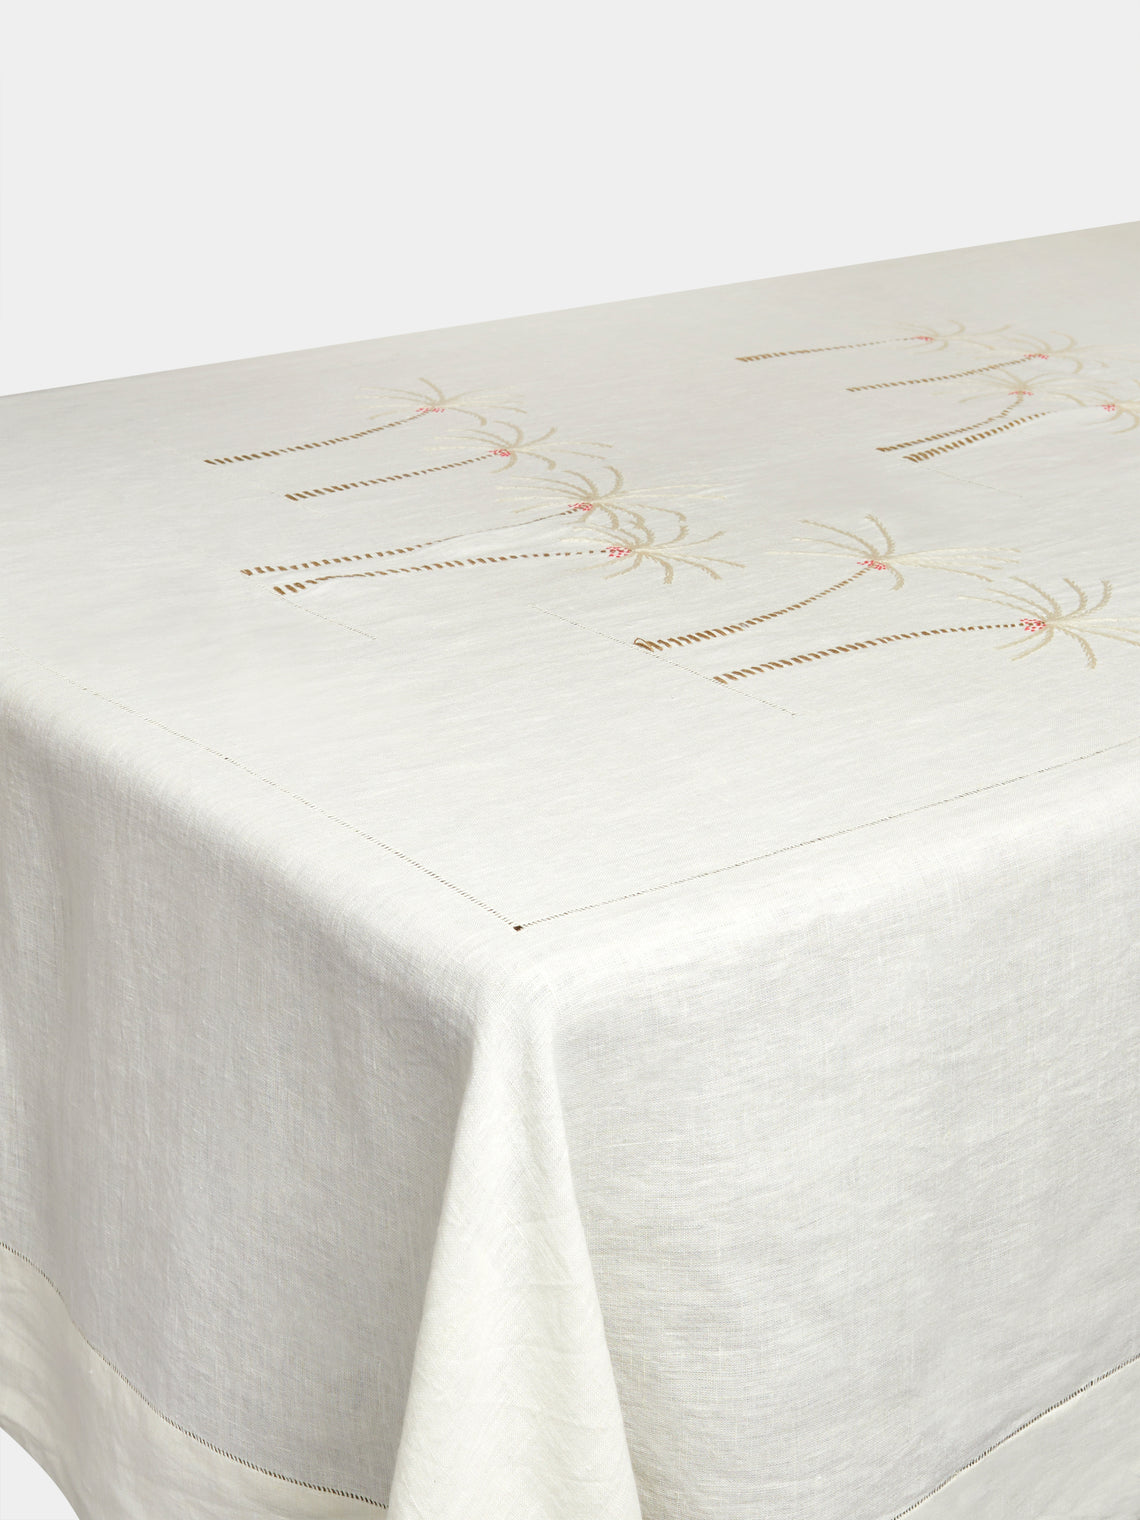 Malaika - Palm Tree Hand-Embroidered Linen Tablecloth - Red - ABASK